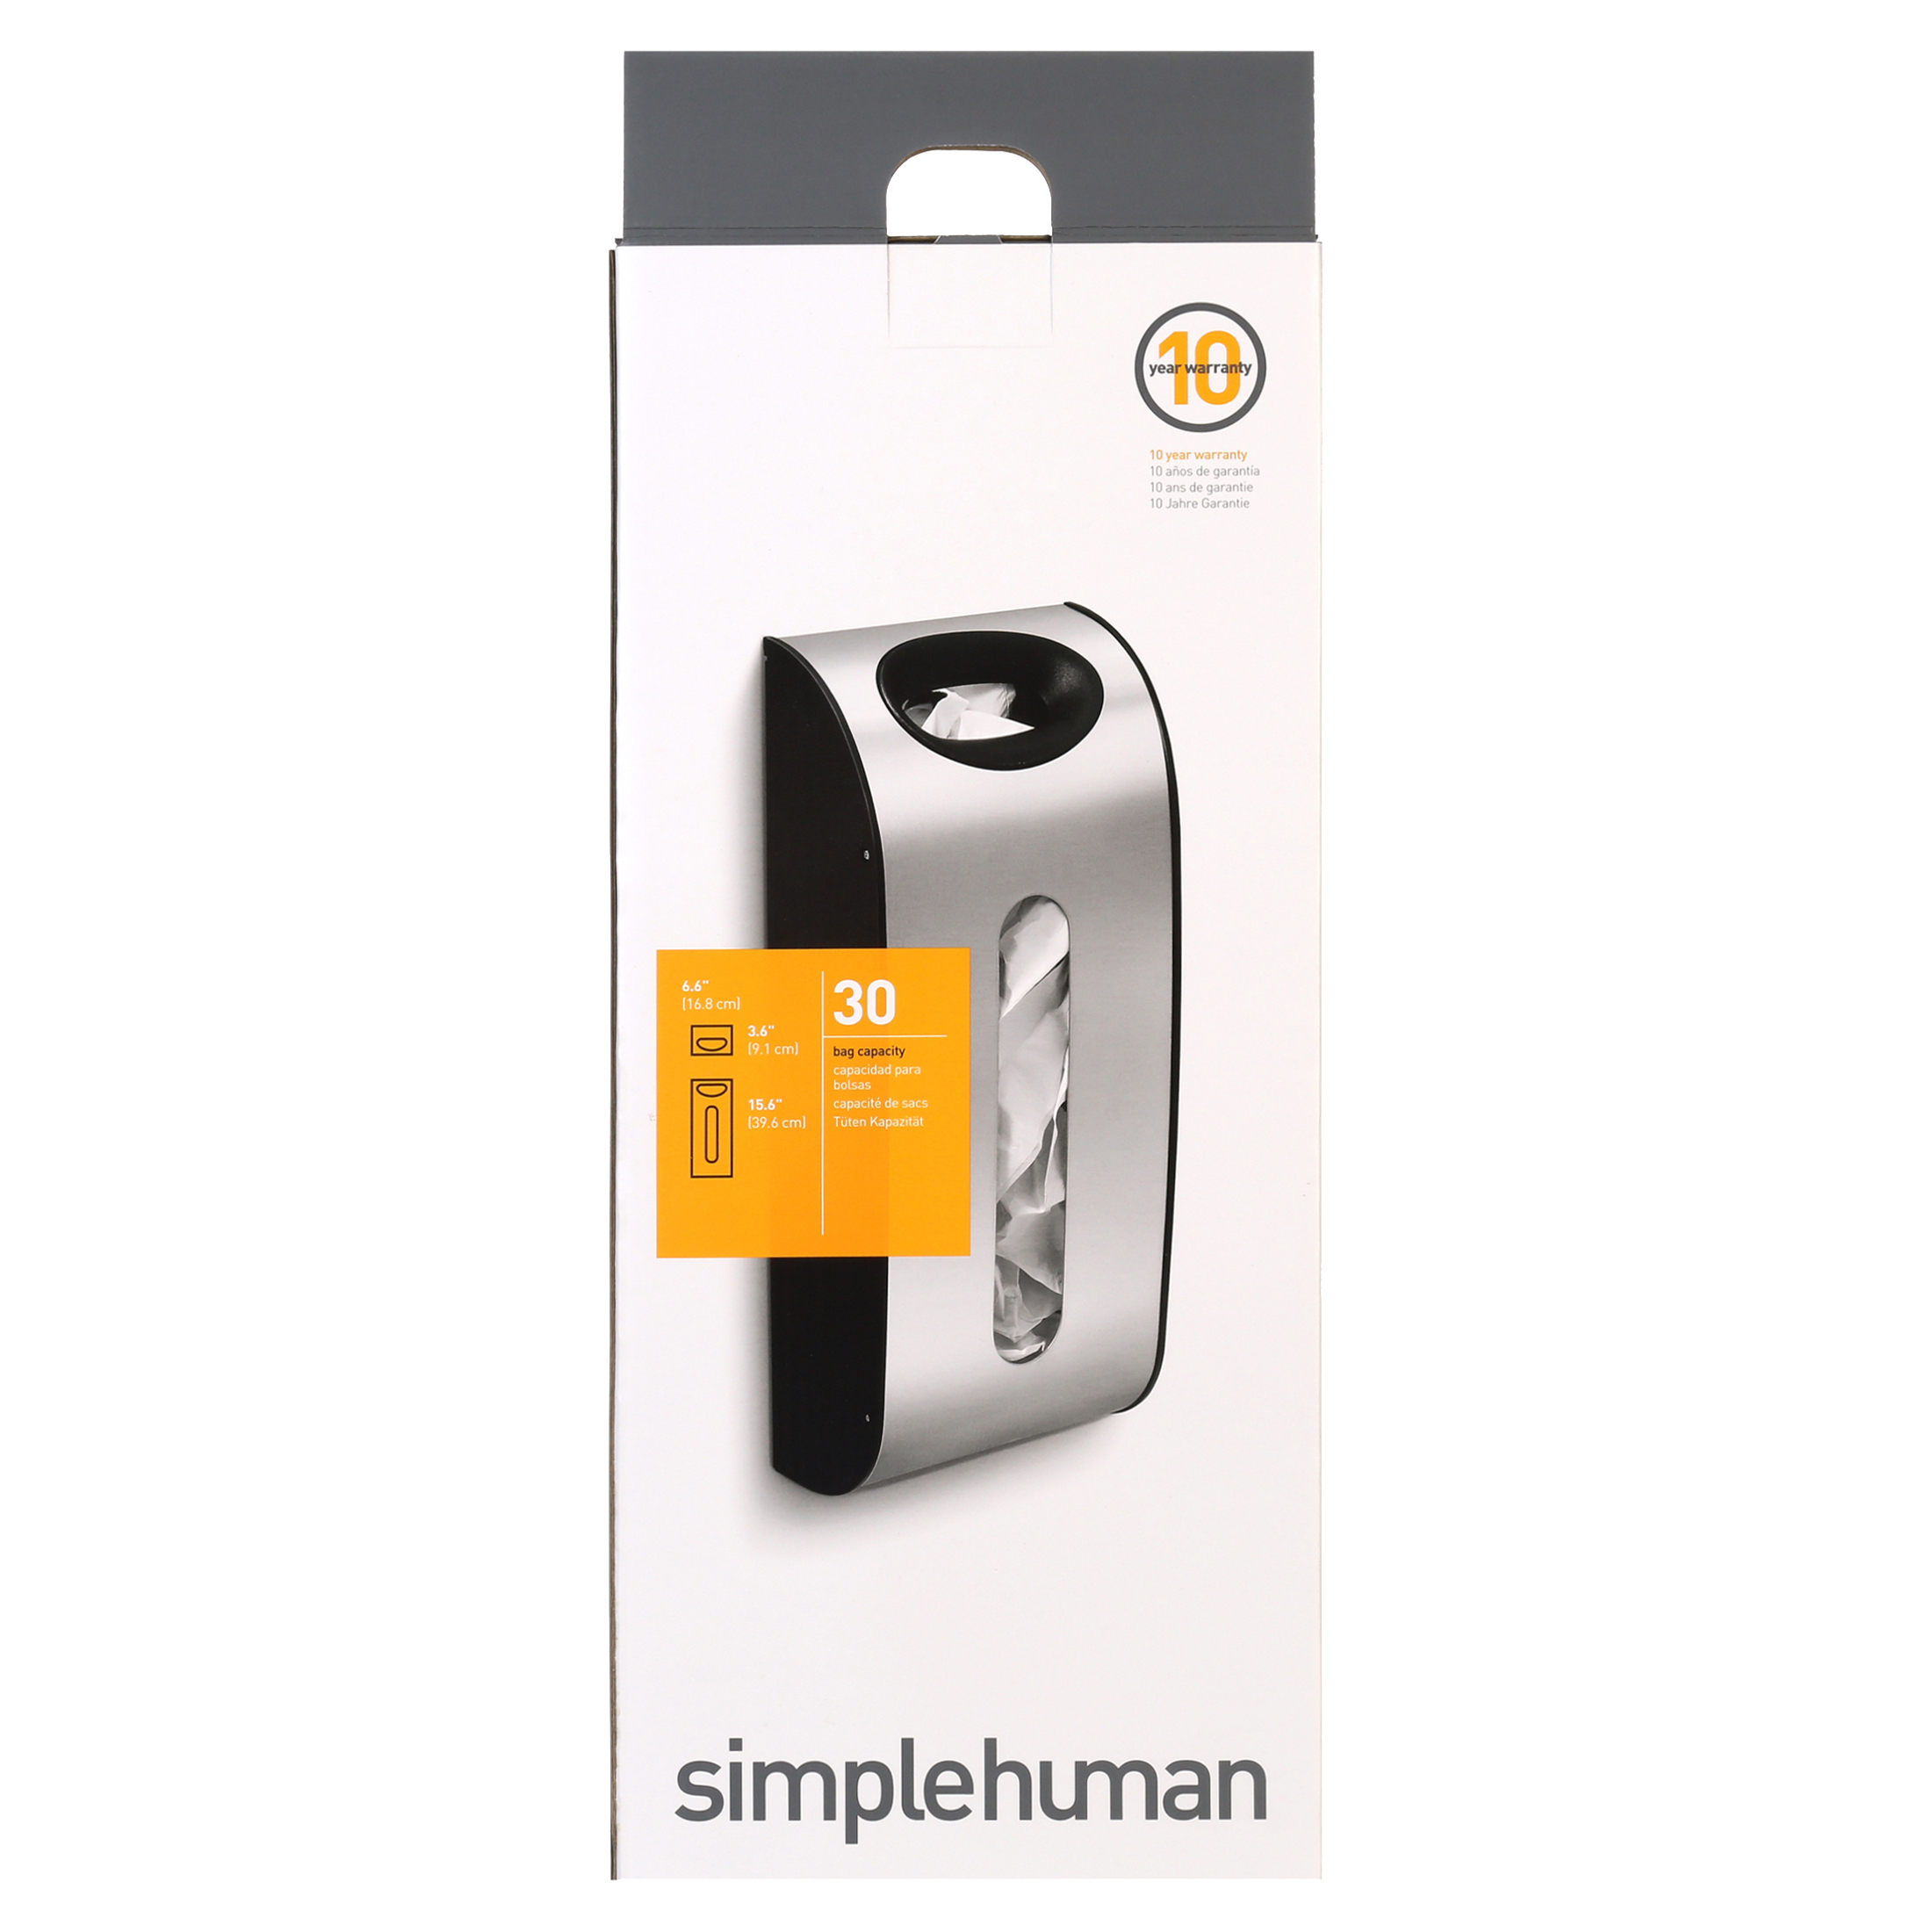 simplehuman Wall Mount Grocery Bag Dispenser, Brushed Stainless Steel - image 4 of 11